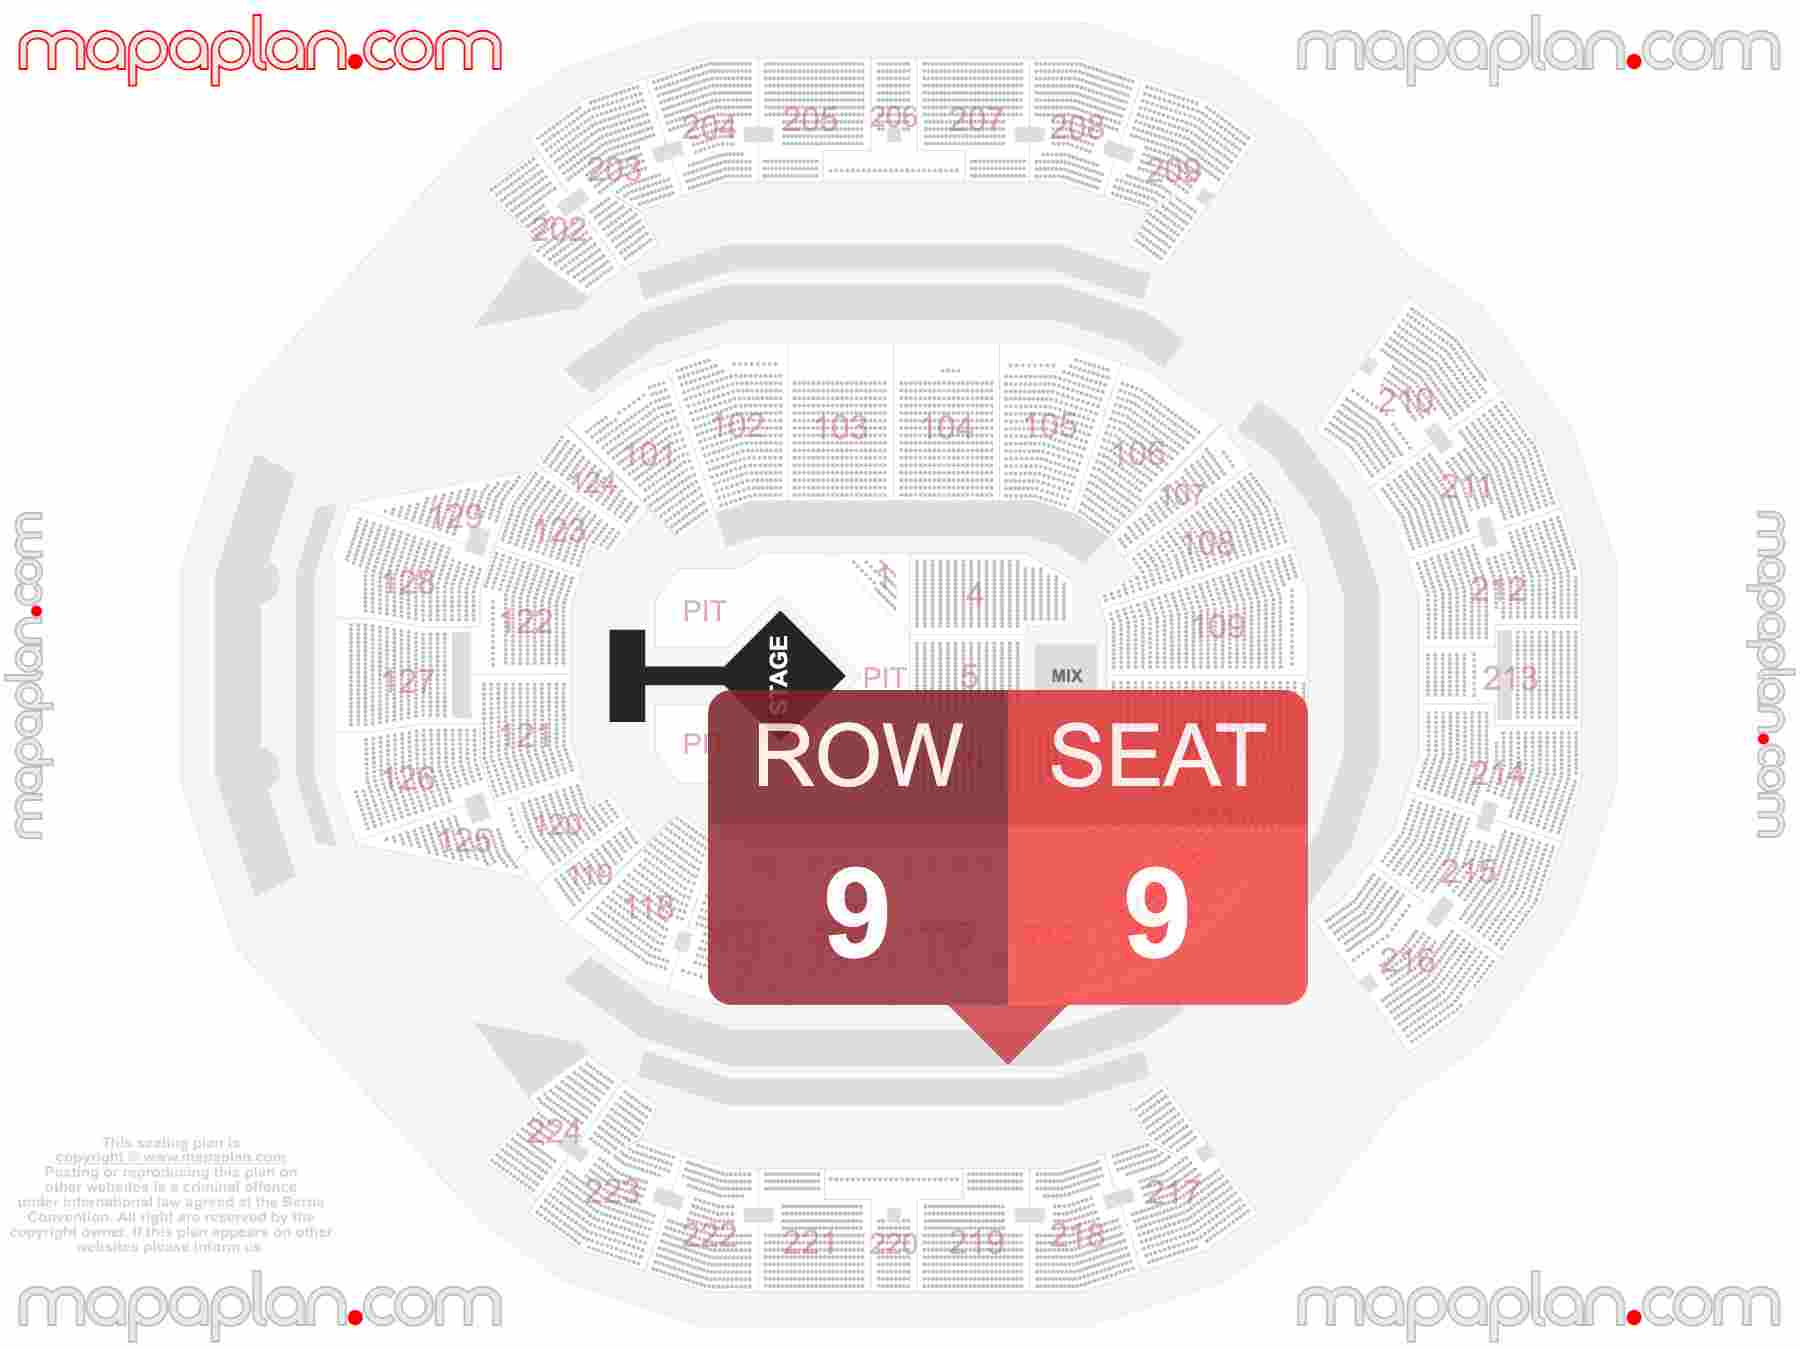 San Francisco Chase Center seating chart Concert diamond stage find best seats row numbering system plan showing how many seats per row - Individual 'find my seat' virtual locator